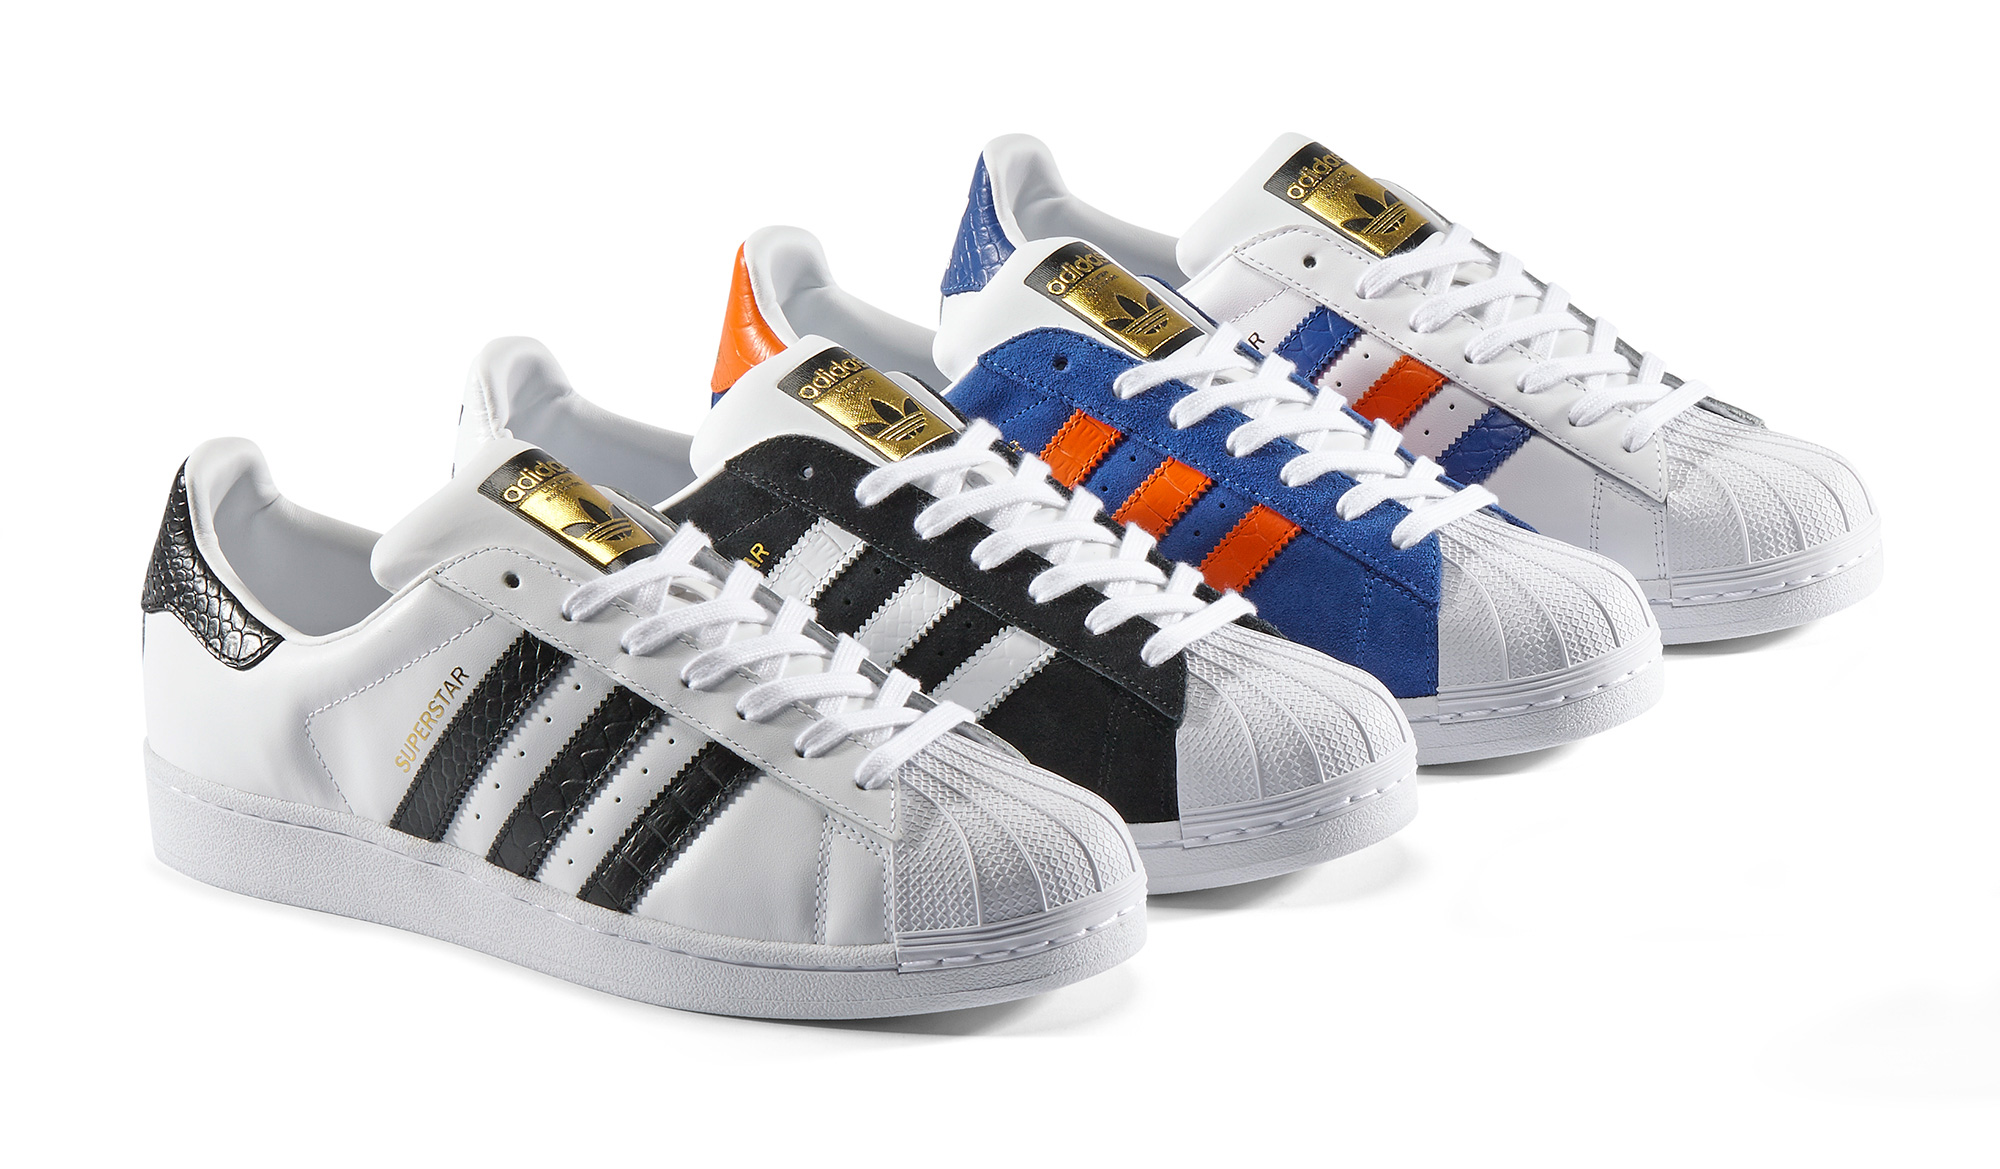 adidas superstar east river rivalry black/white